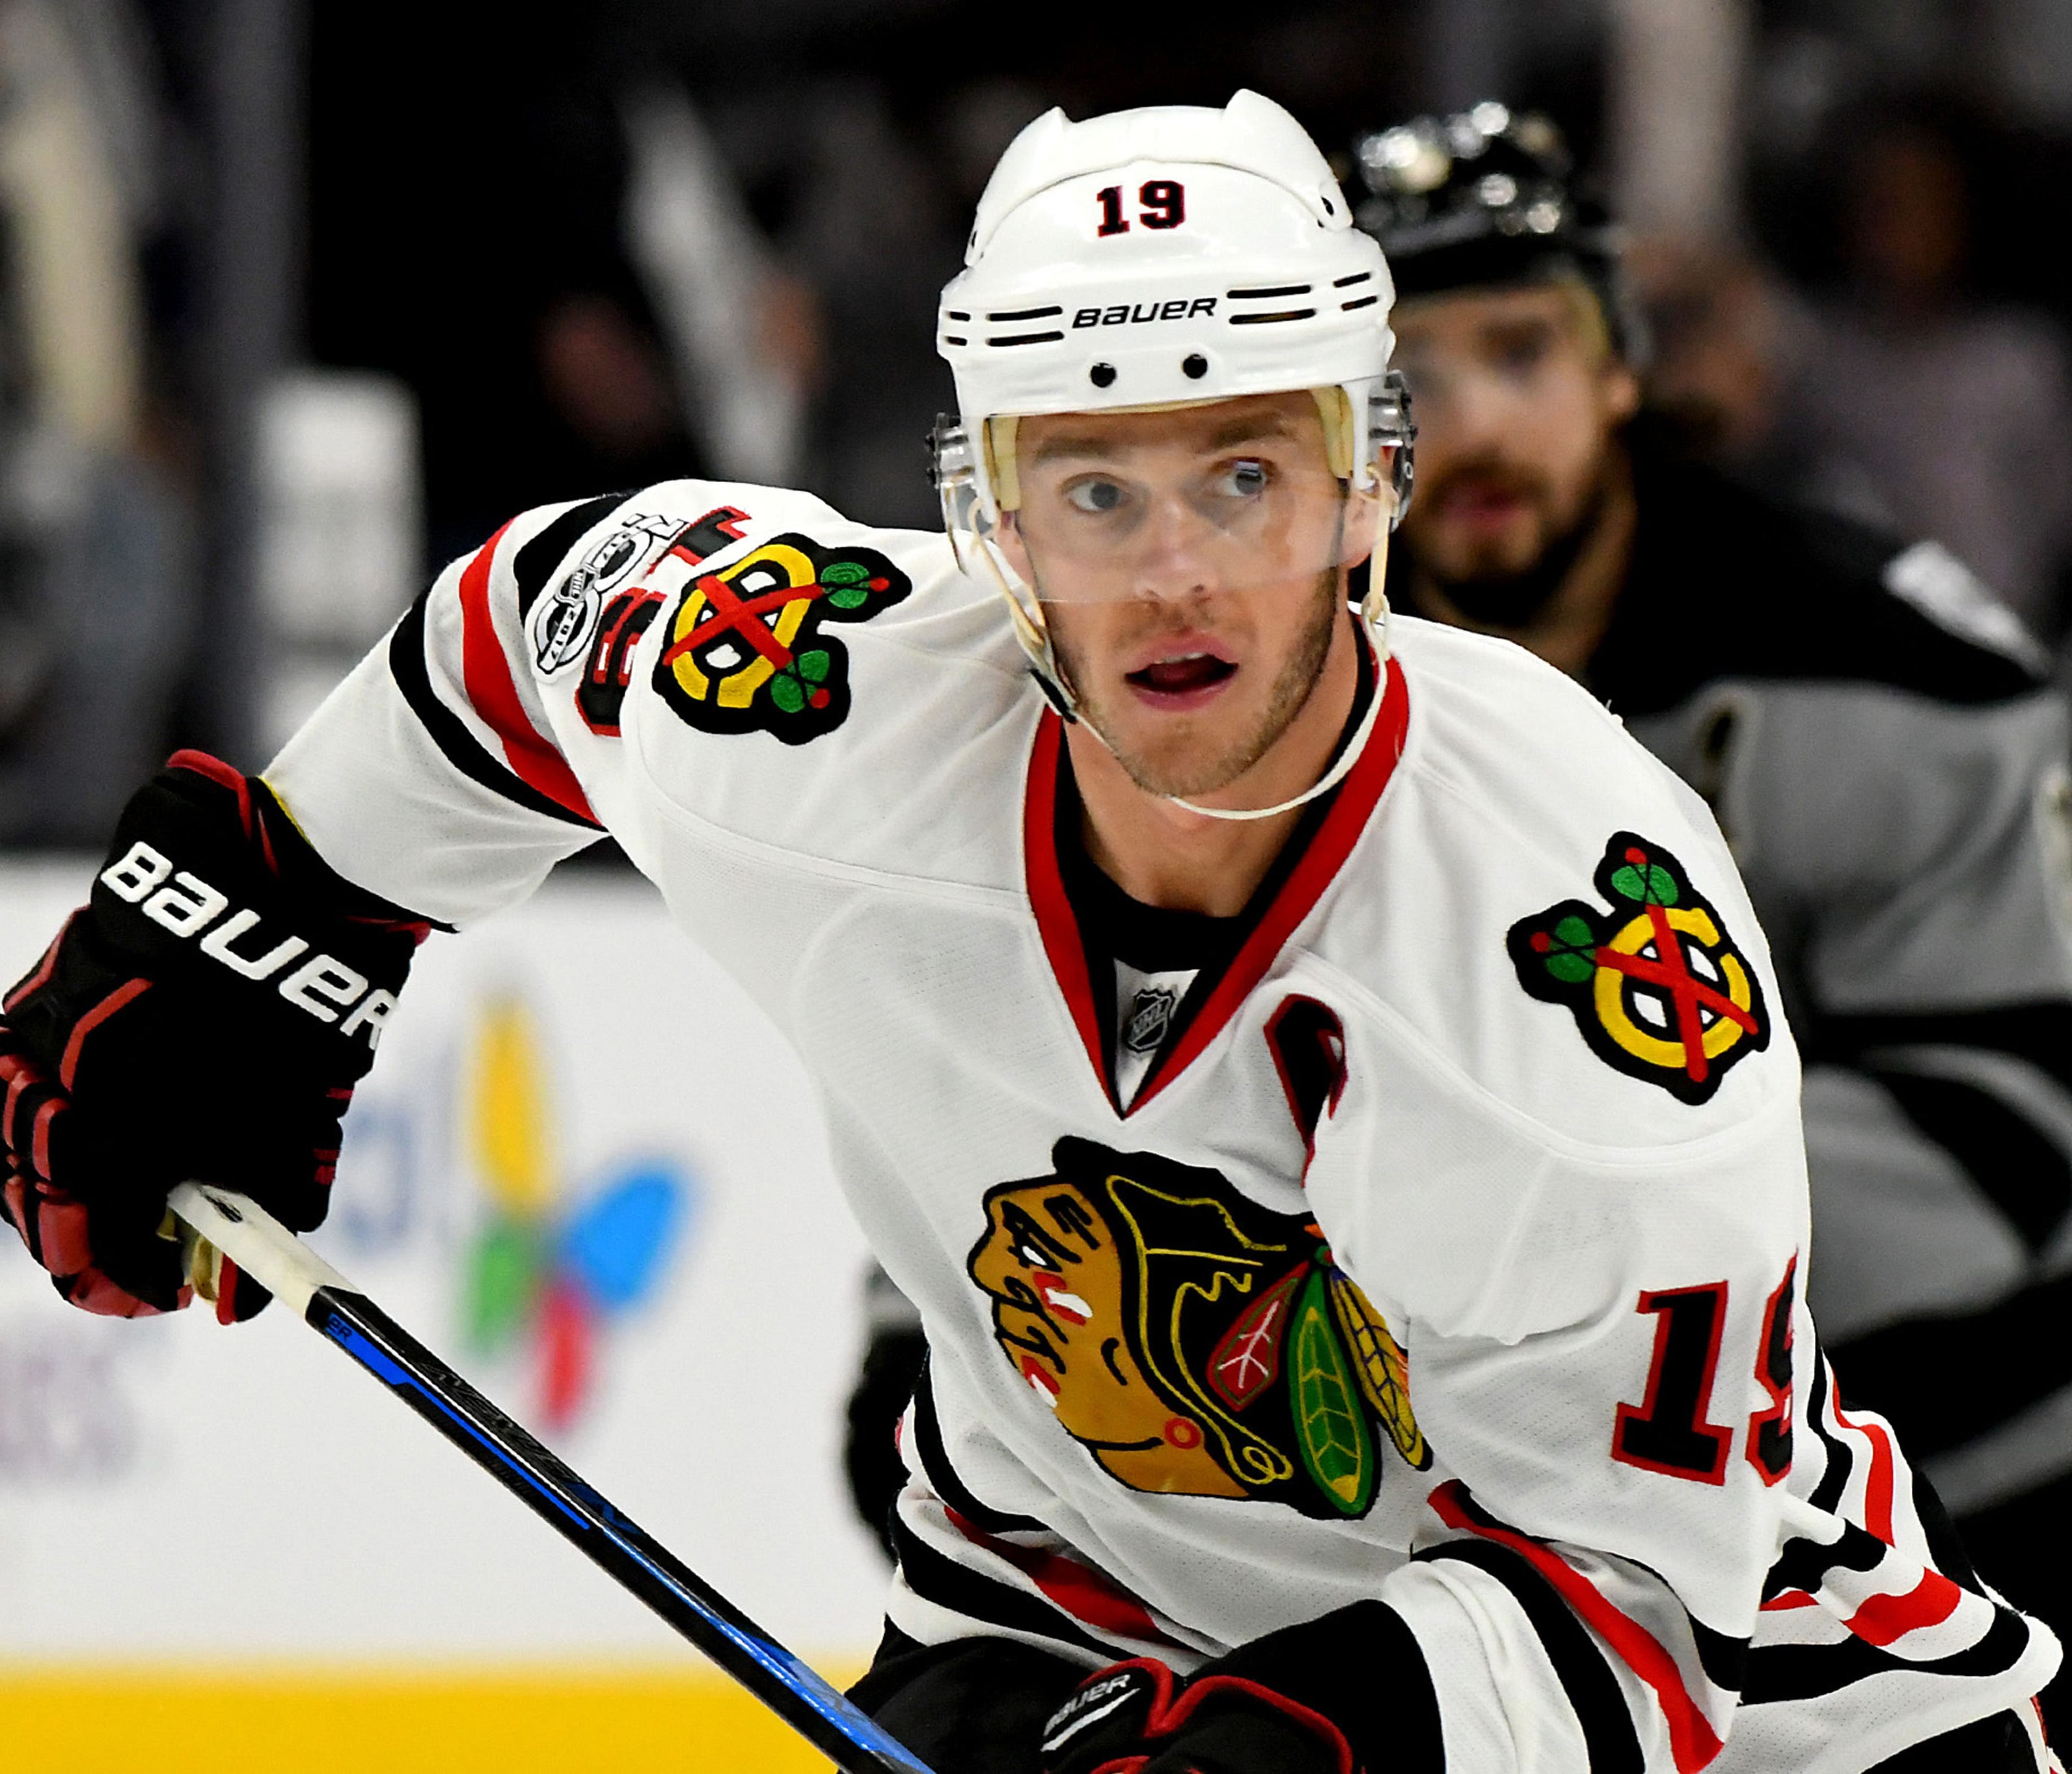 Apr 8, 2017; Los Angeles, CA, USA; Chicago Blackhawks center Jonathan Toews (19) in the third period of the game against the Los Angeles Kings at Staples Center. Kings won 3-2 in overtime. Mandatory Credit: Jayne Kamin-Oncea-USA TODAY Sports ORG XMIT